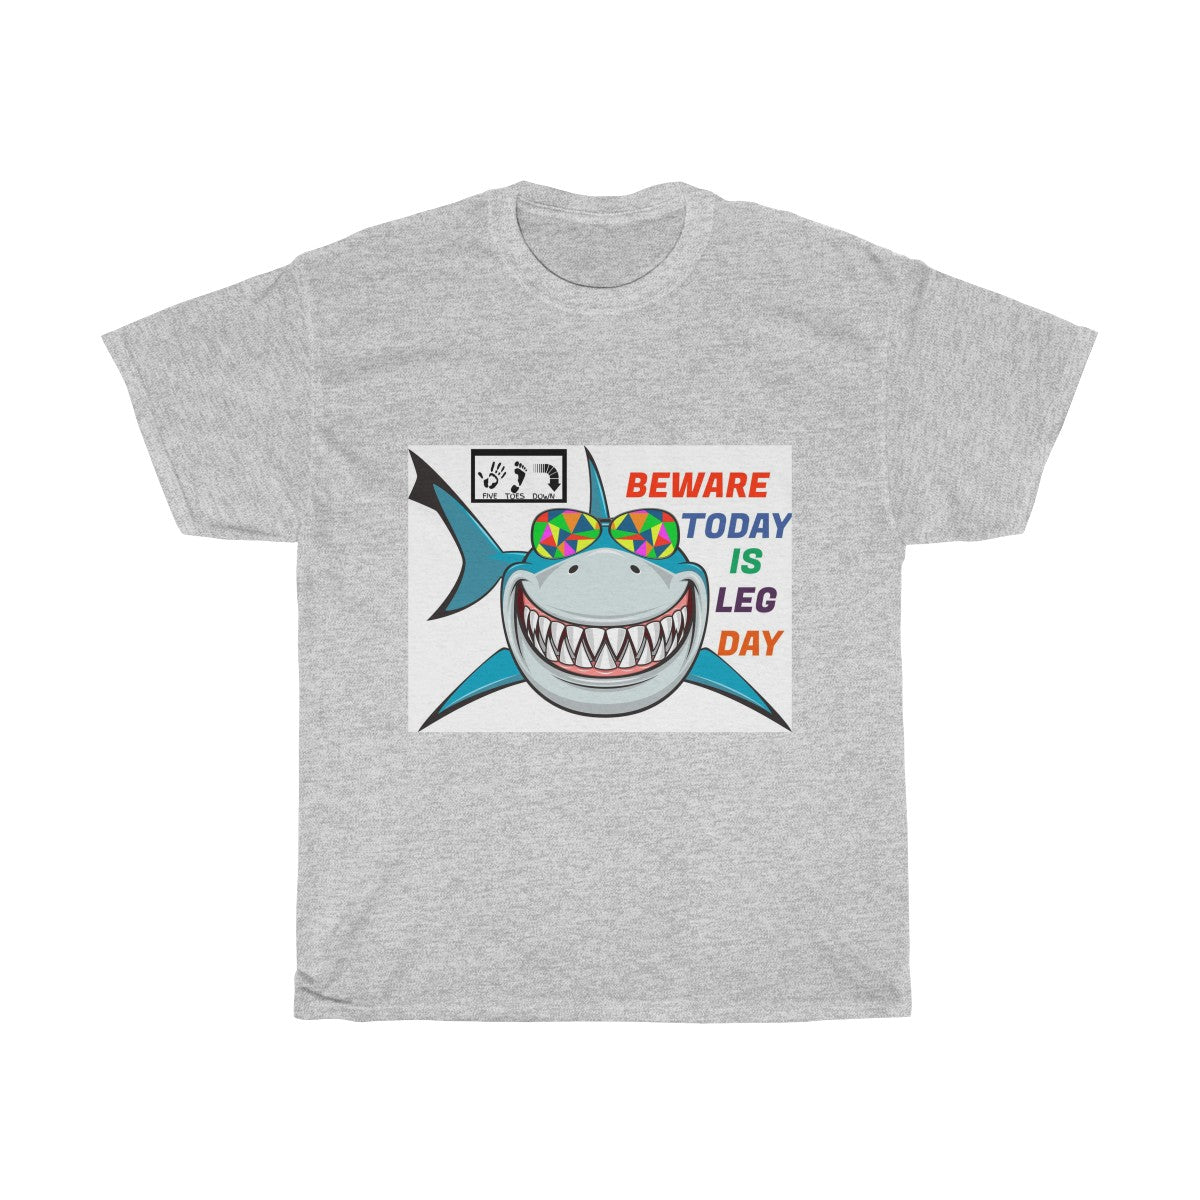 Five Toes Down Shark Attack Unisex Tee